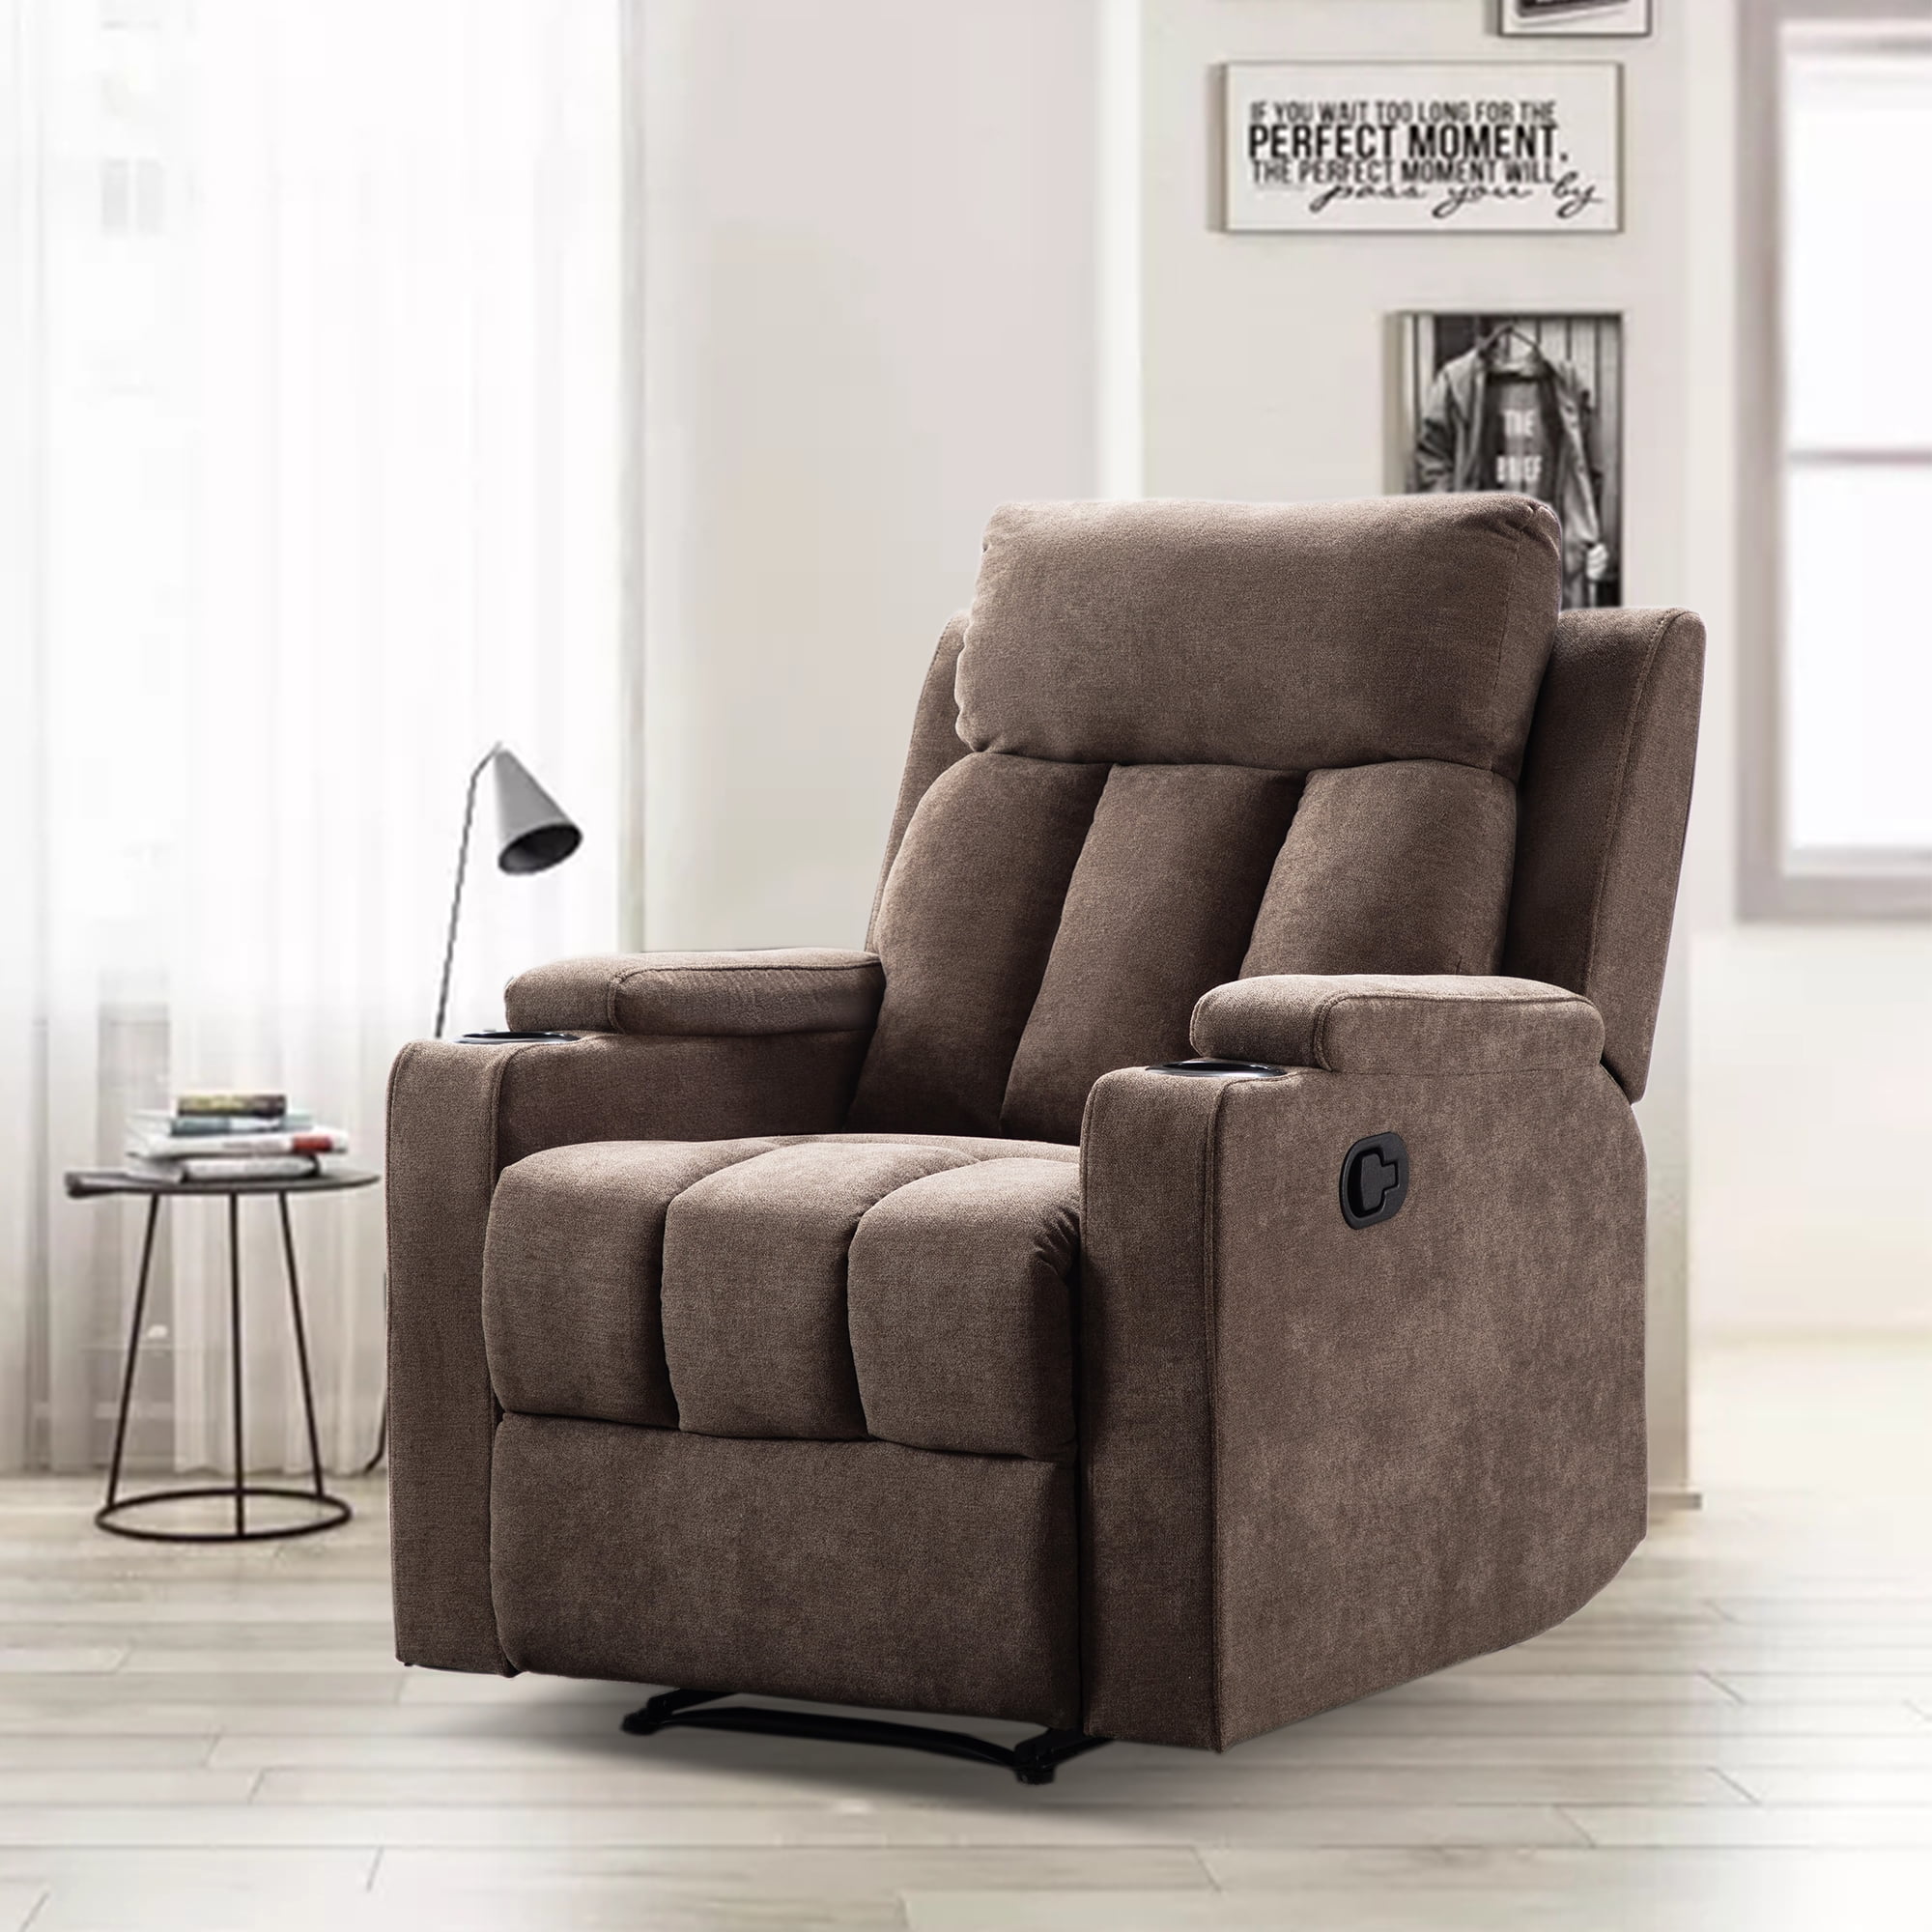 Manual Recliner Chair for the Elderly, Fabric Recliner